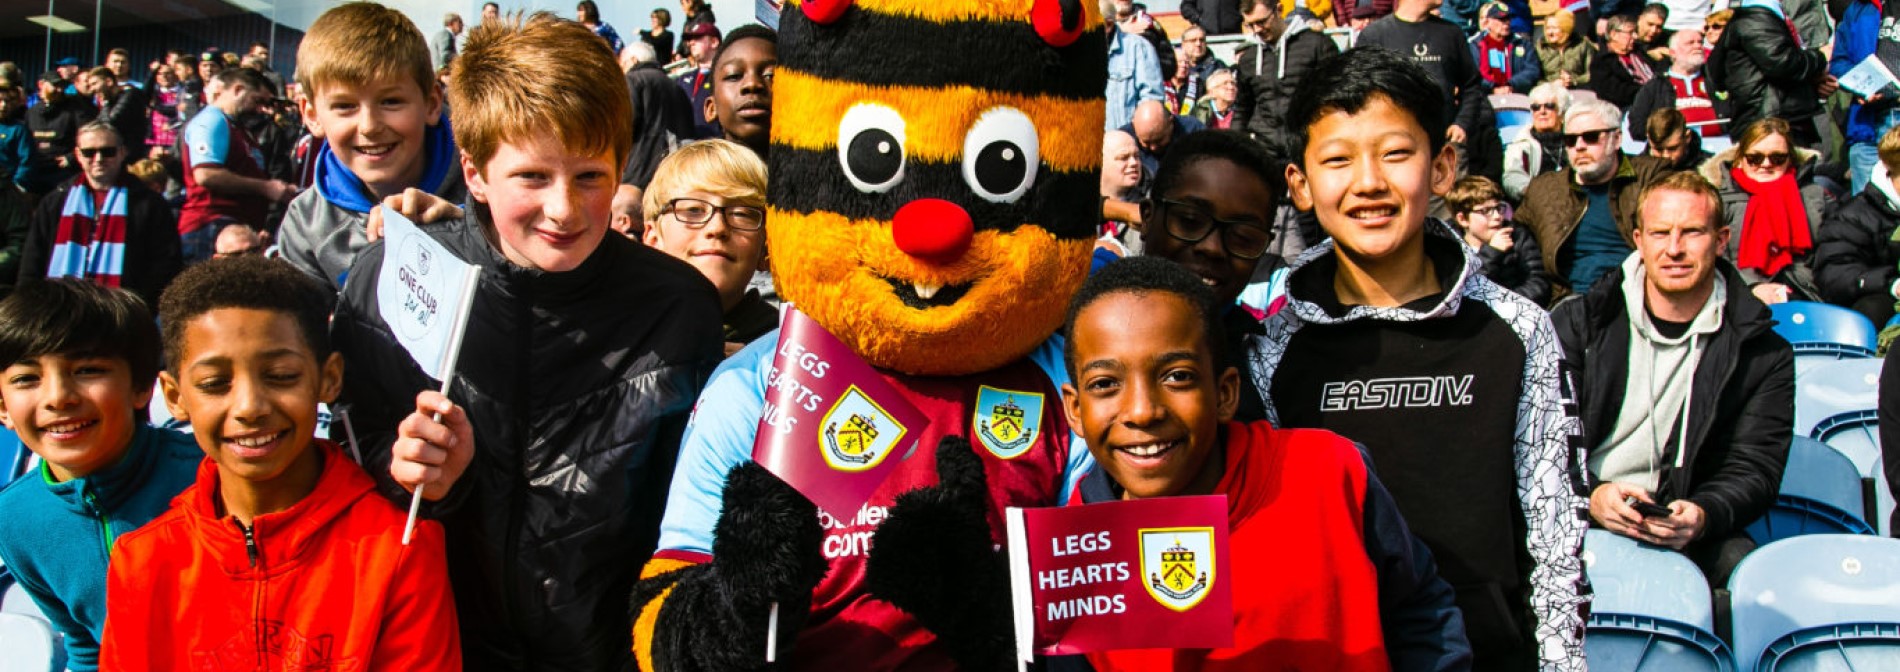 Burnley FC's Equality & Inclusion Season Review